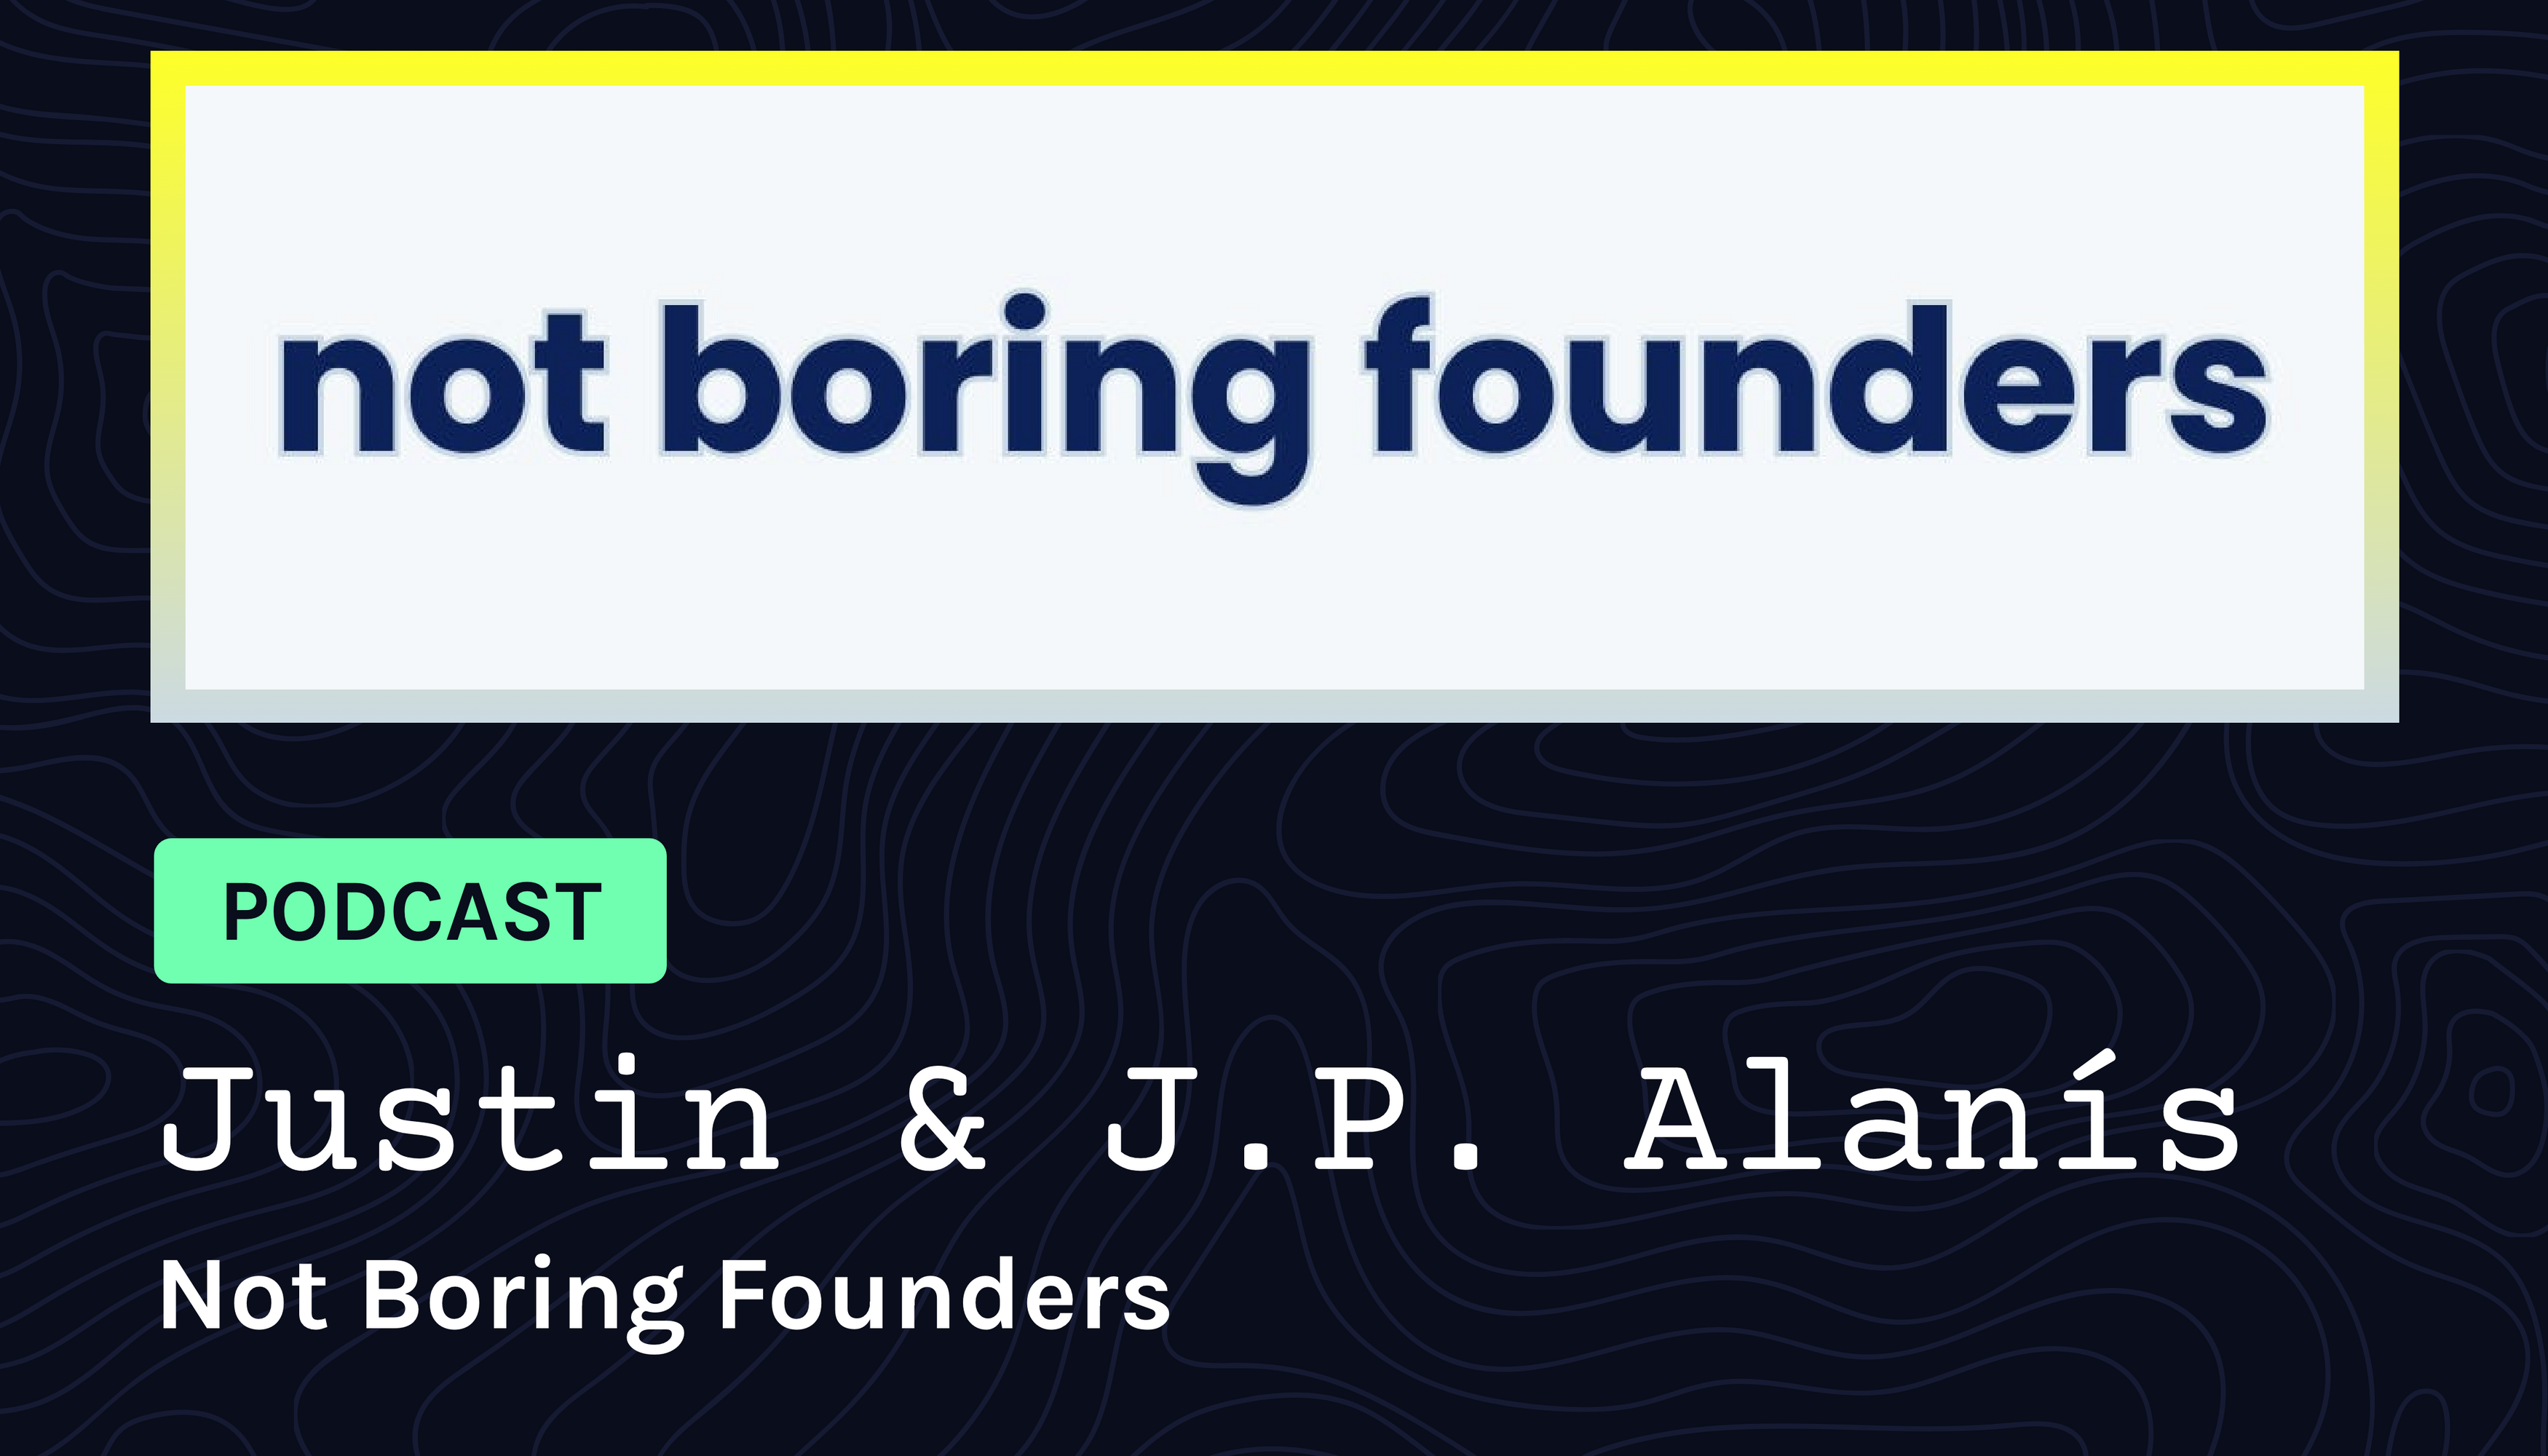 Cover image for Podcast: Not Boring Founders: Justin & J.P. Alanís